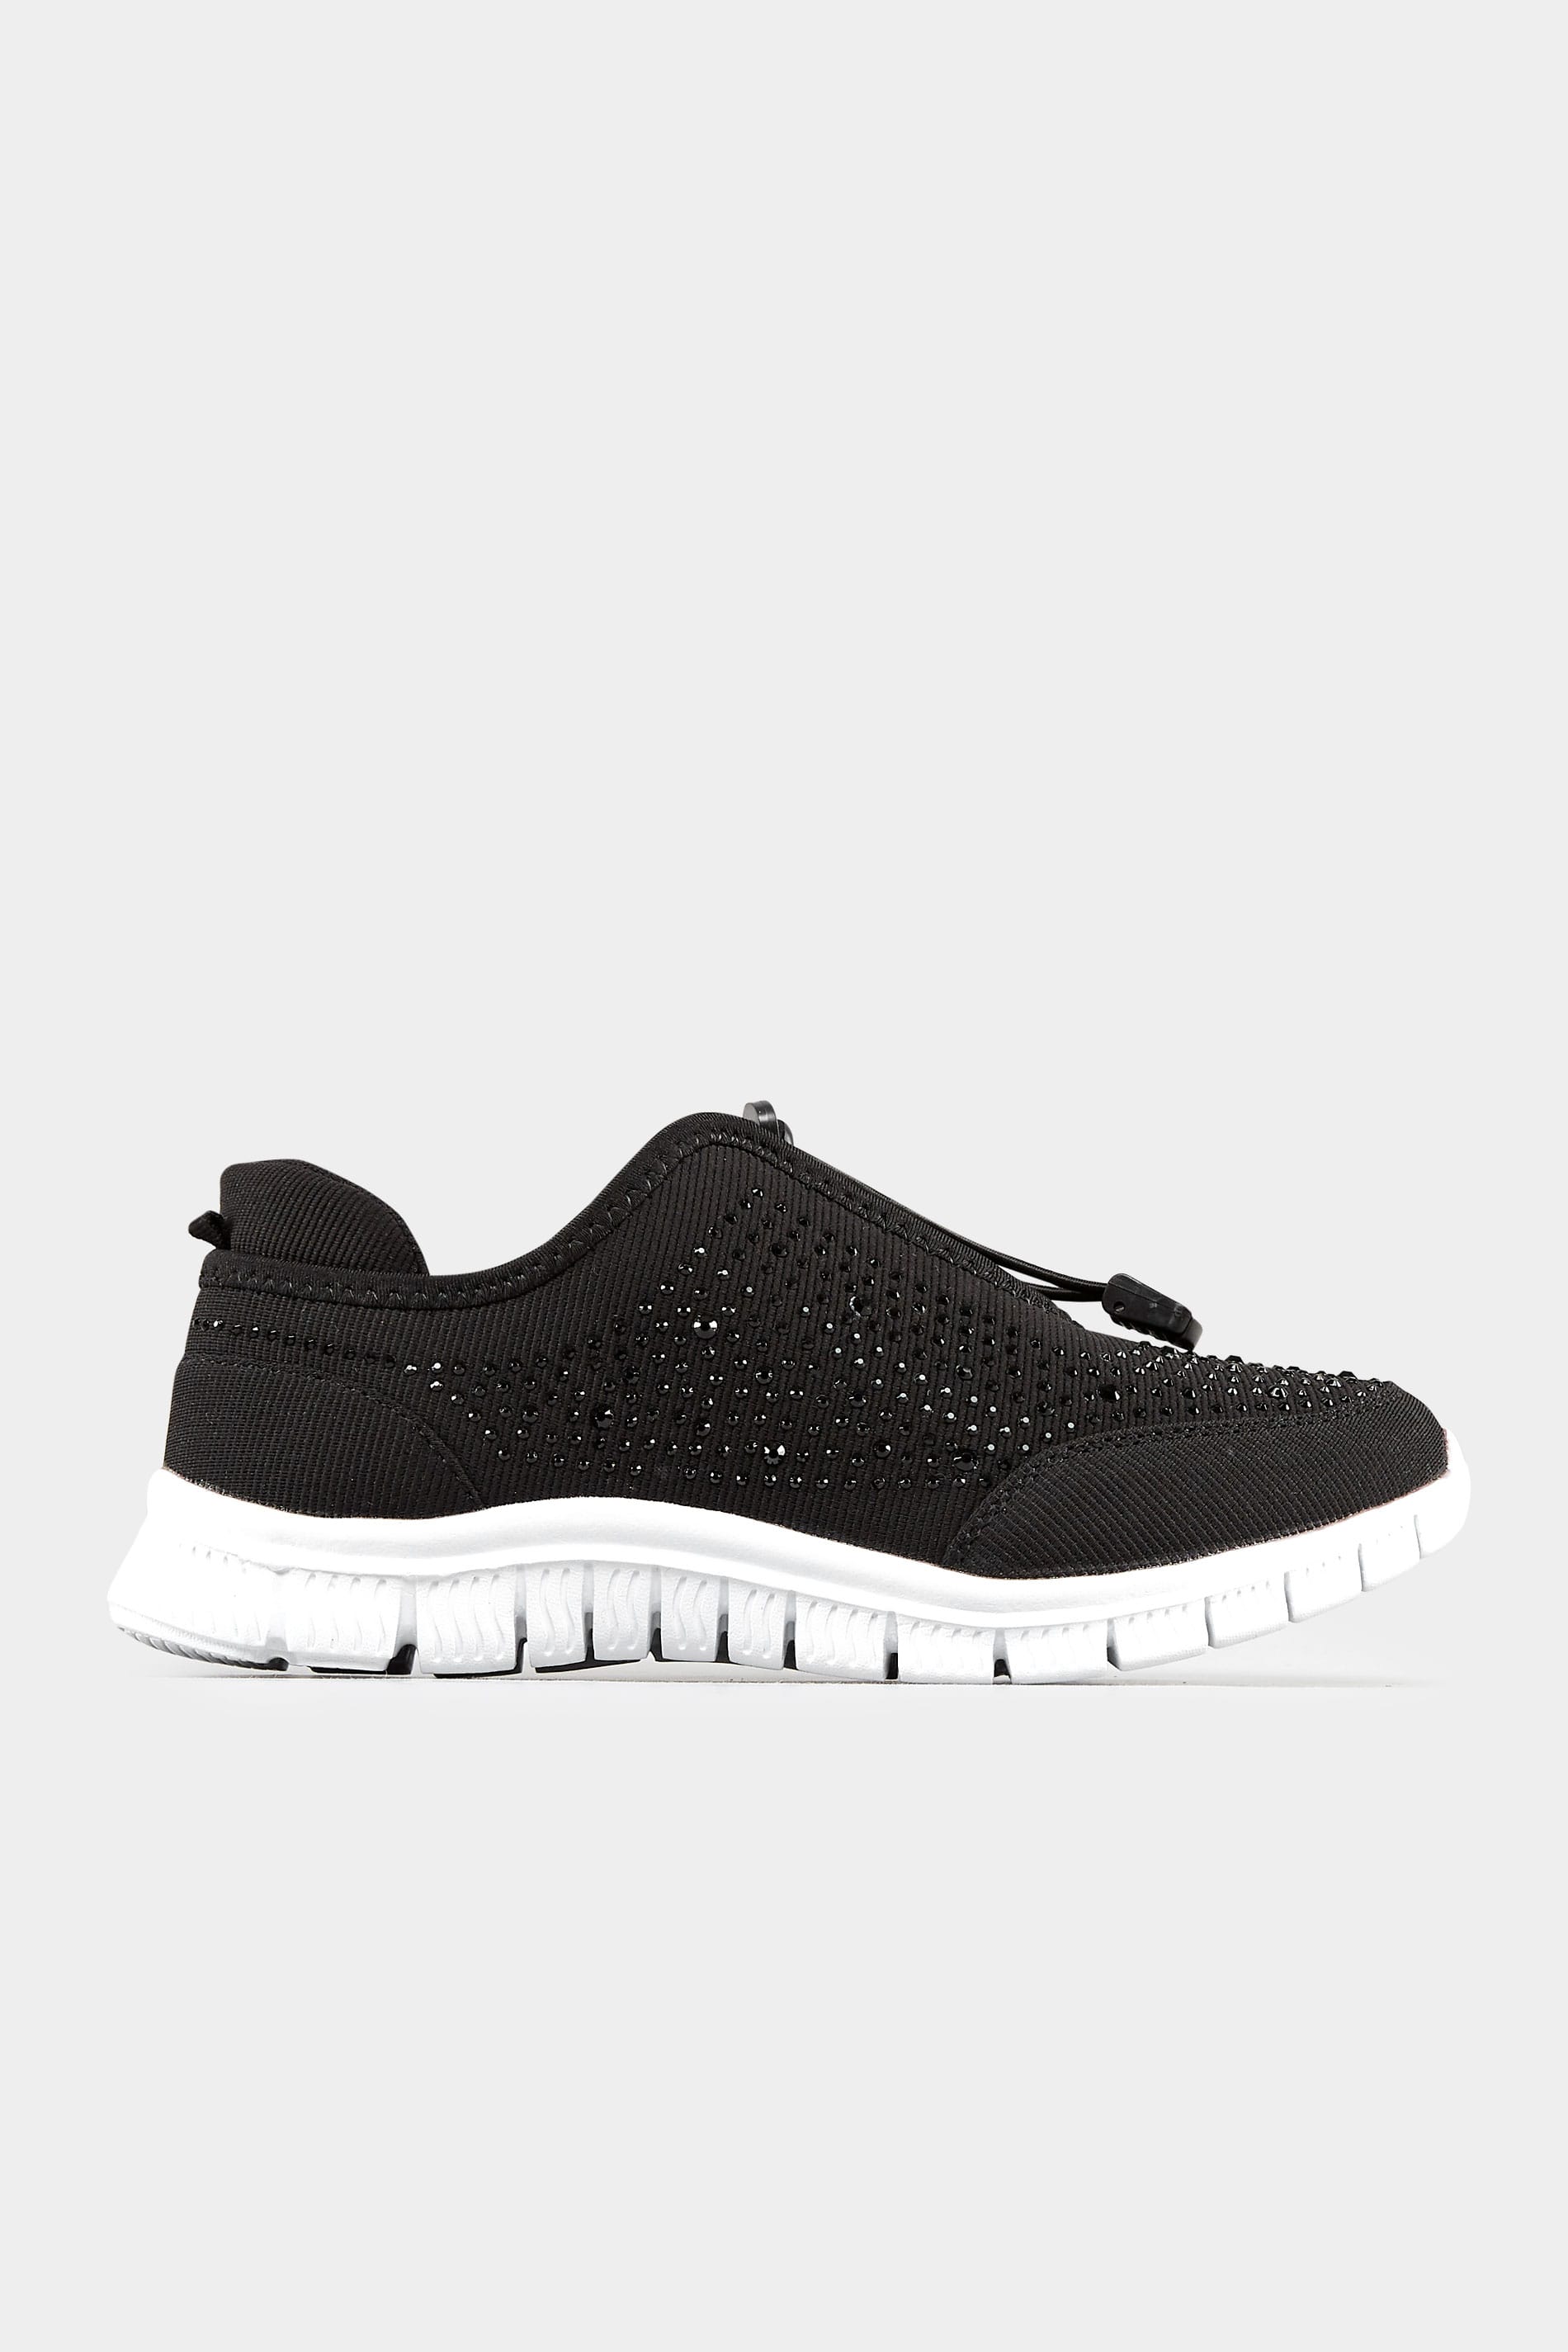 Chaussures Pieds Larges Tennis & Baskets Pieds Larges | Baskets Noires avec Strass Pieds Larges EEE - JW46326